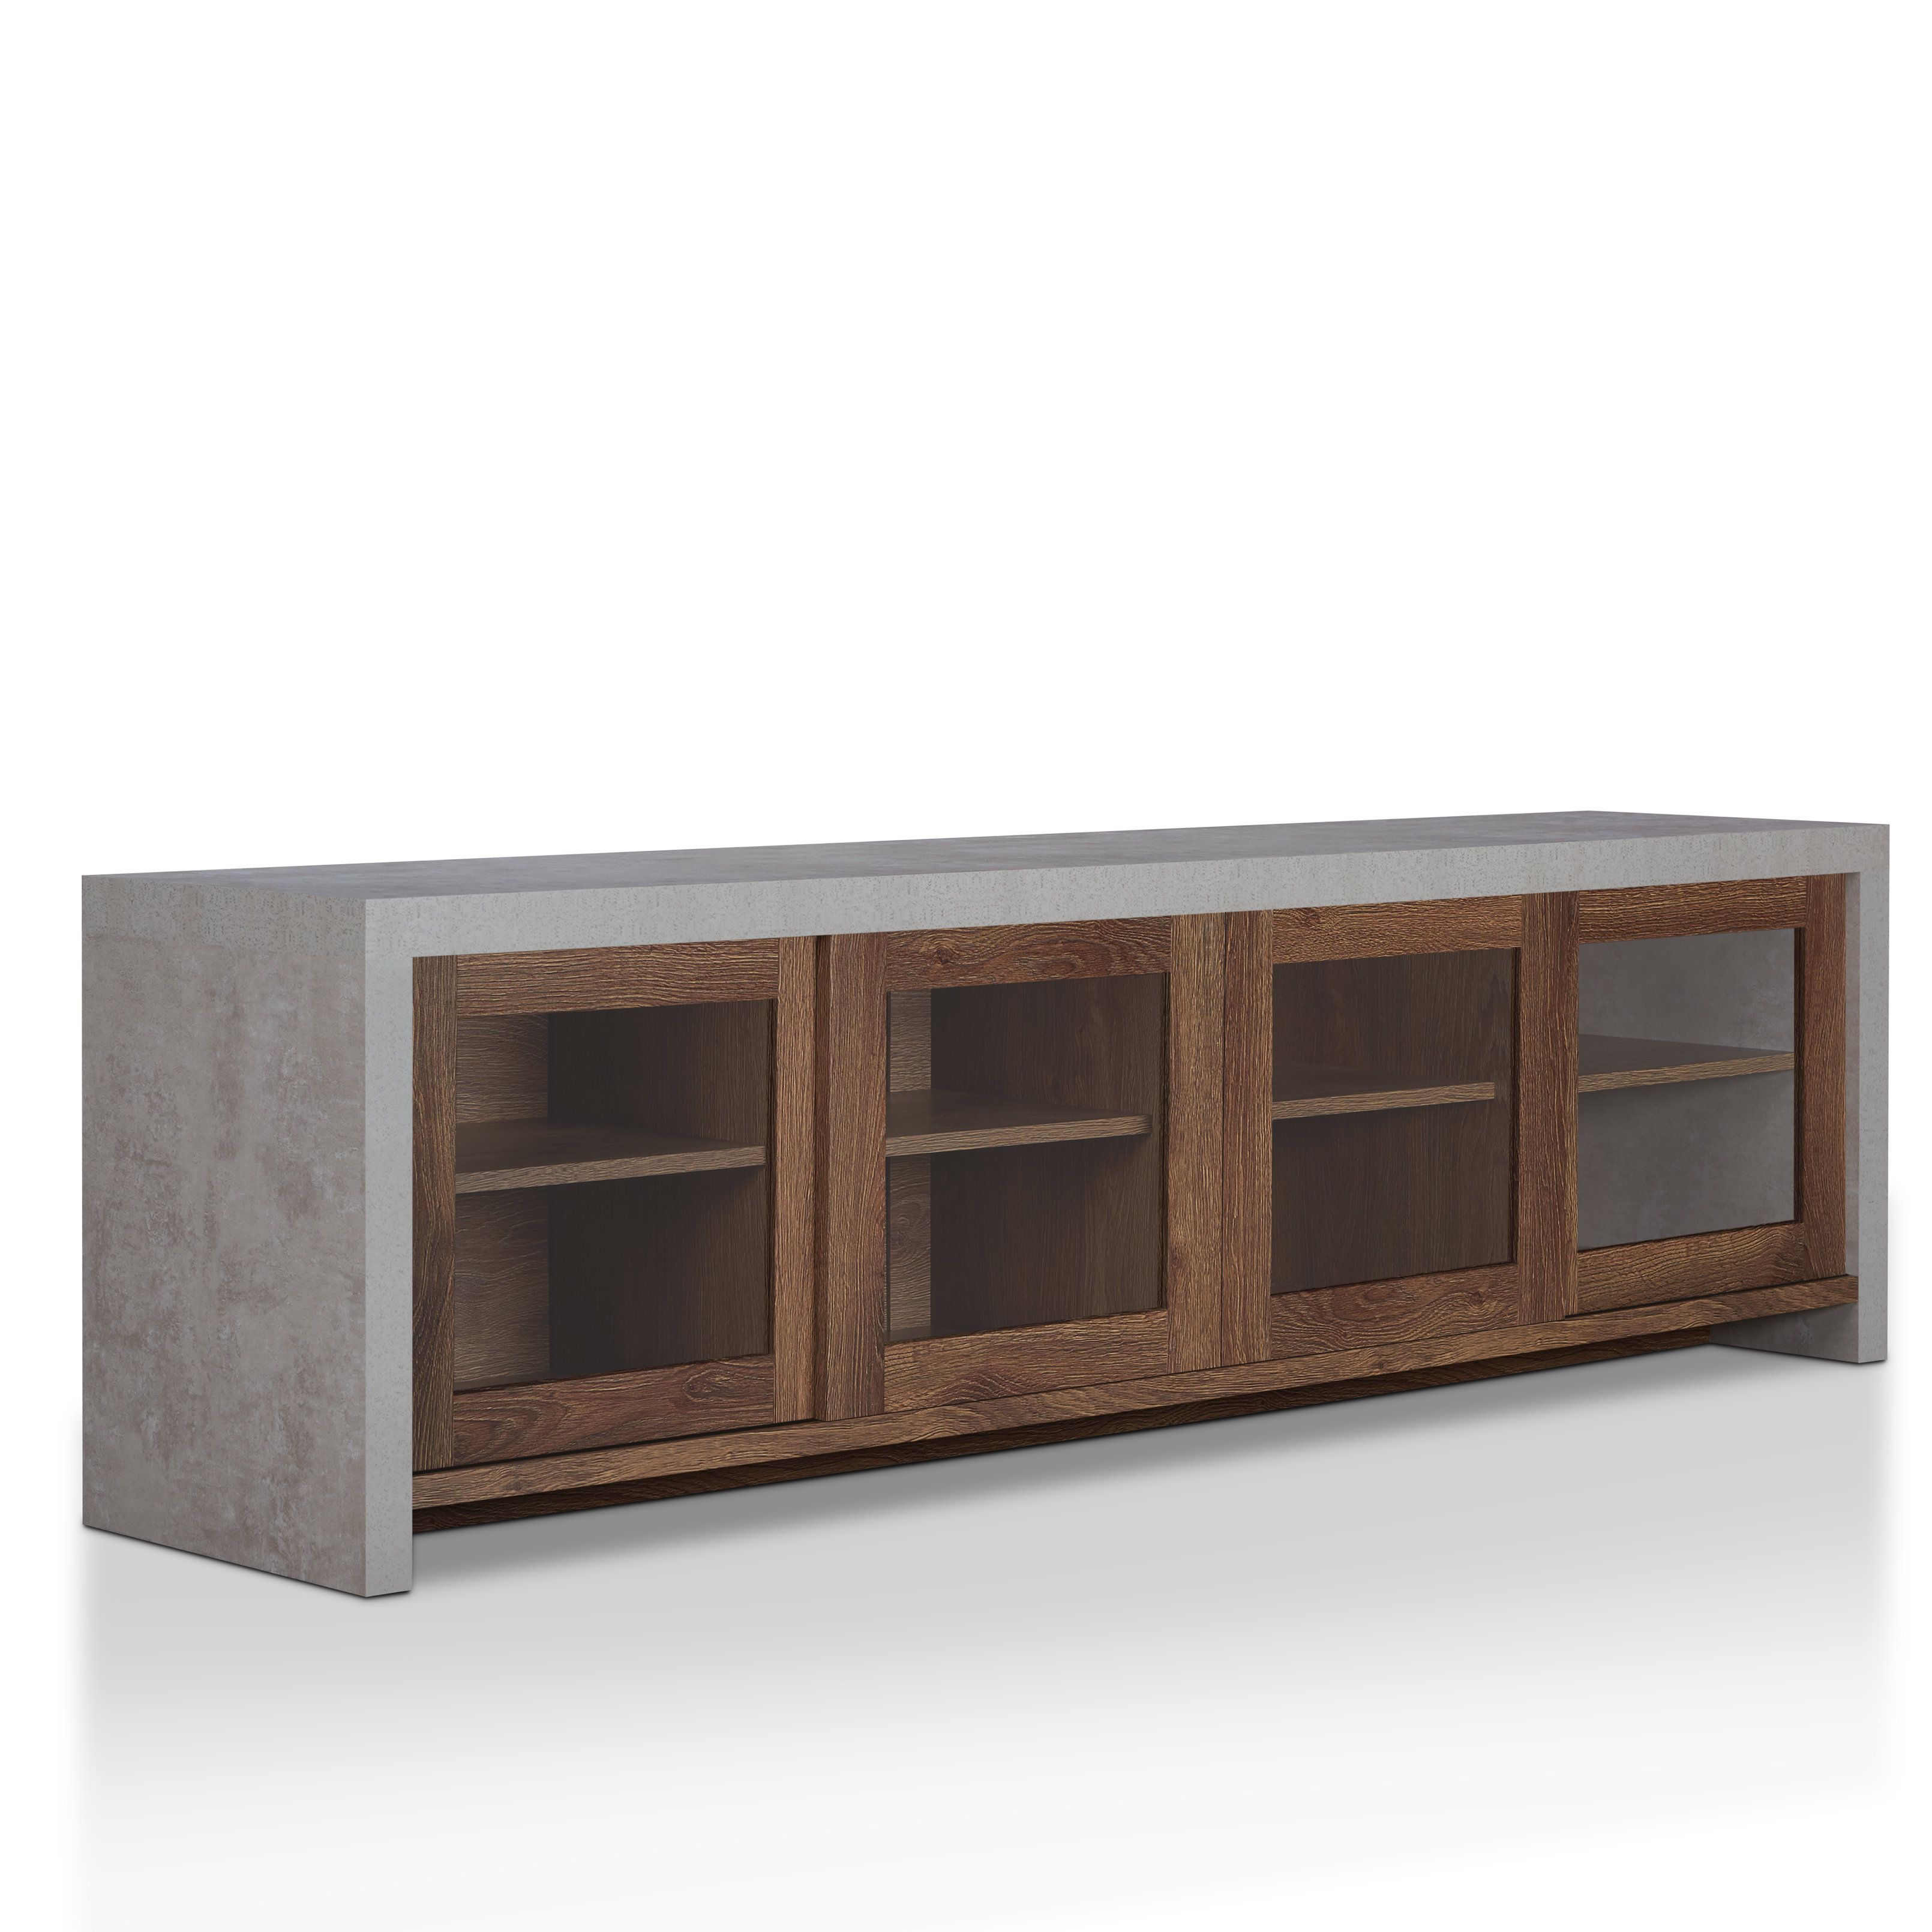 Behan Transitional Tv Stand For Tvs Up To 70" & Reviews | Allmodern Within Laurent 70 Inch Tv Stands (Photo 18 of 30)